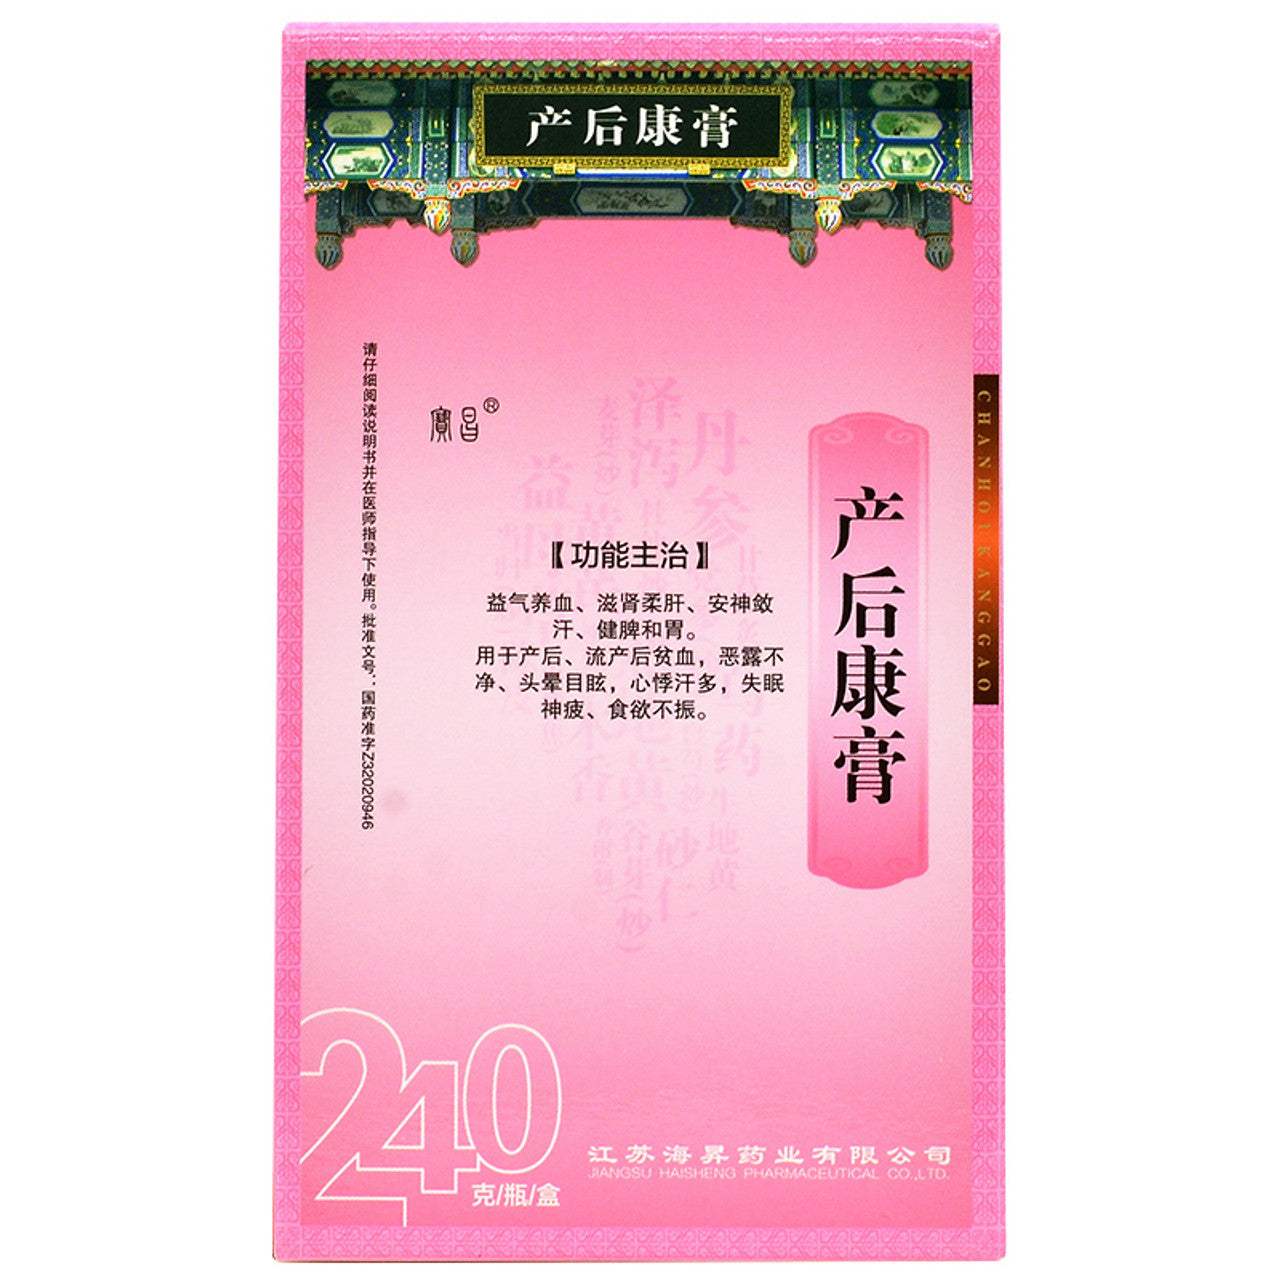 China Herb. Brand Baochang. Chanhoukang Gao or Chanhoukang Syrup or Chan Hou Kang Gao or Chan Hou Kang Syrup or ChanHouKangGao  For postpartum and post-abortion anemia, unclean lochia, dizziness, palpitations and sweating, insomnia.